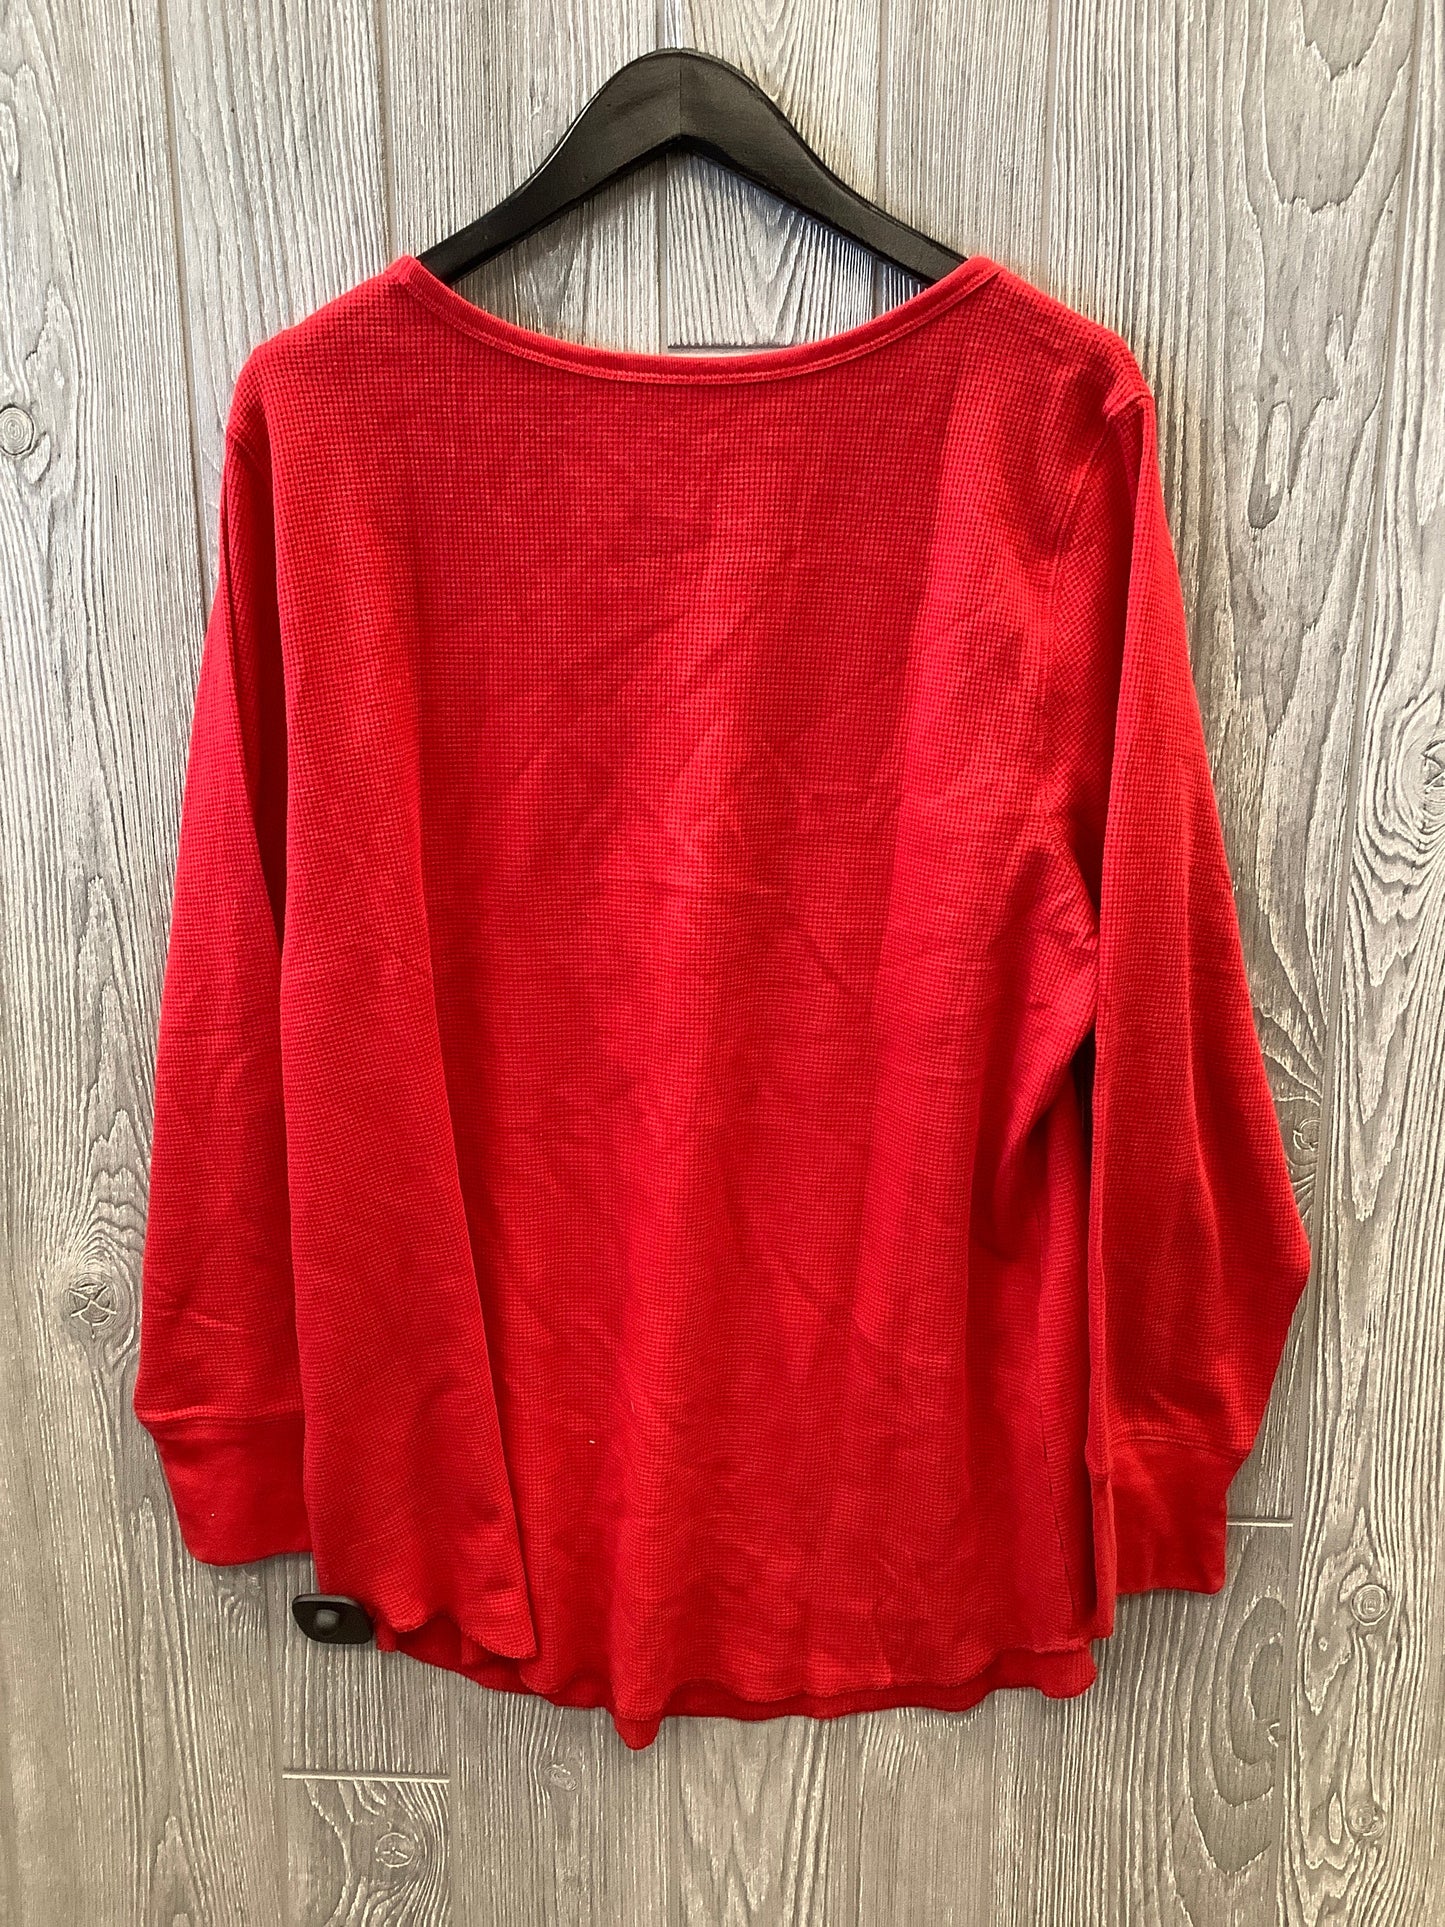 Top Long Sleeve By Old Navy  Size: 2x